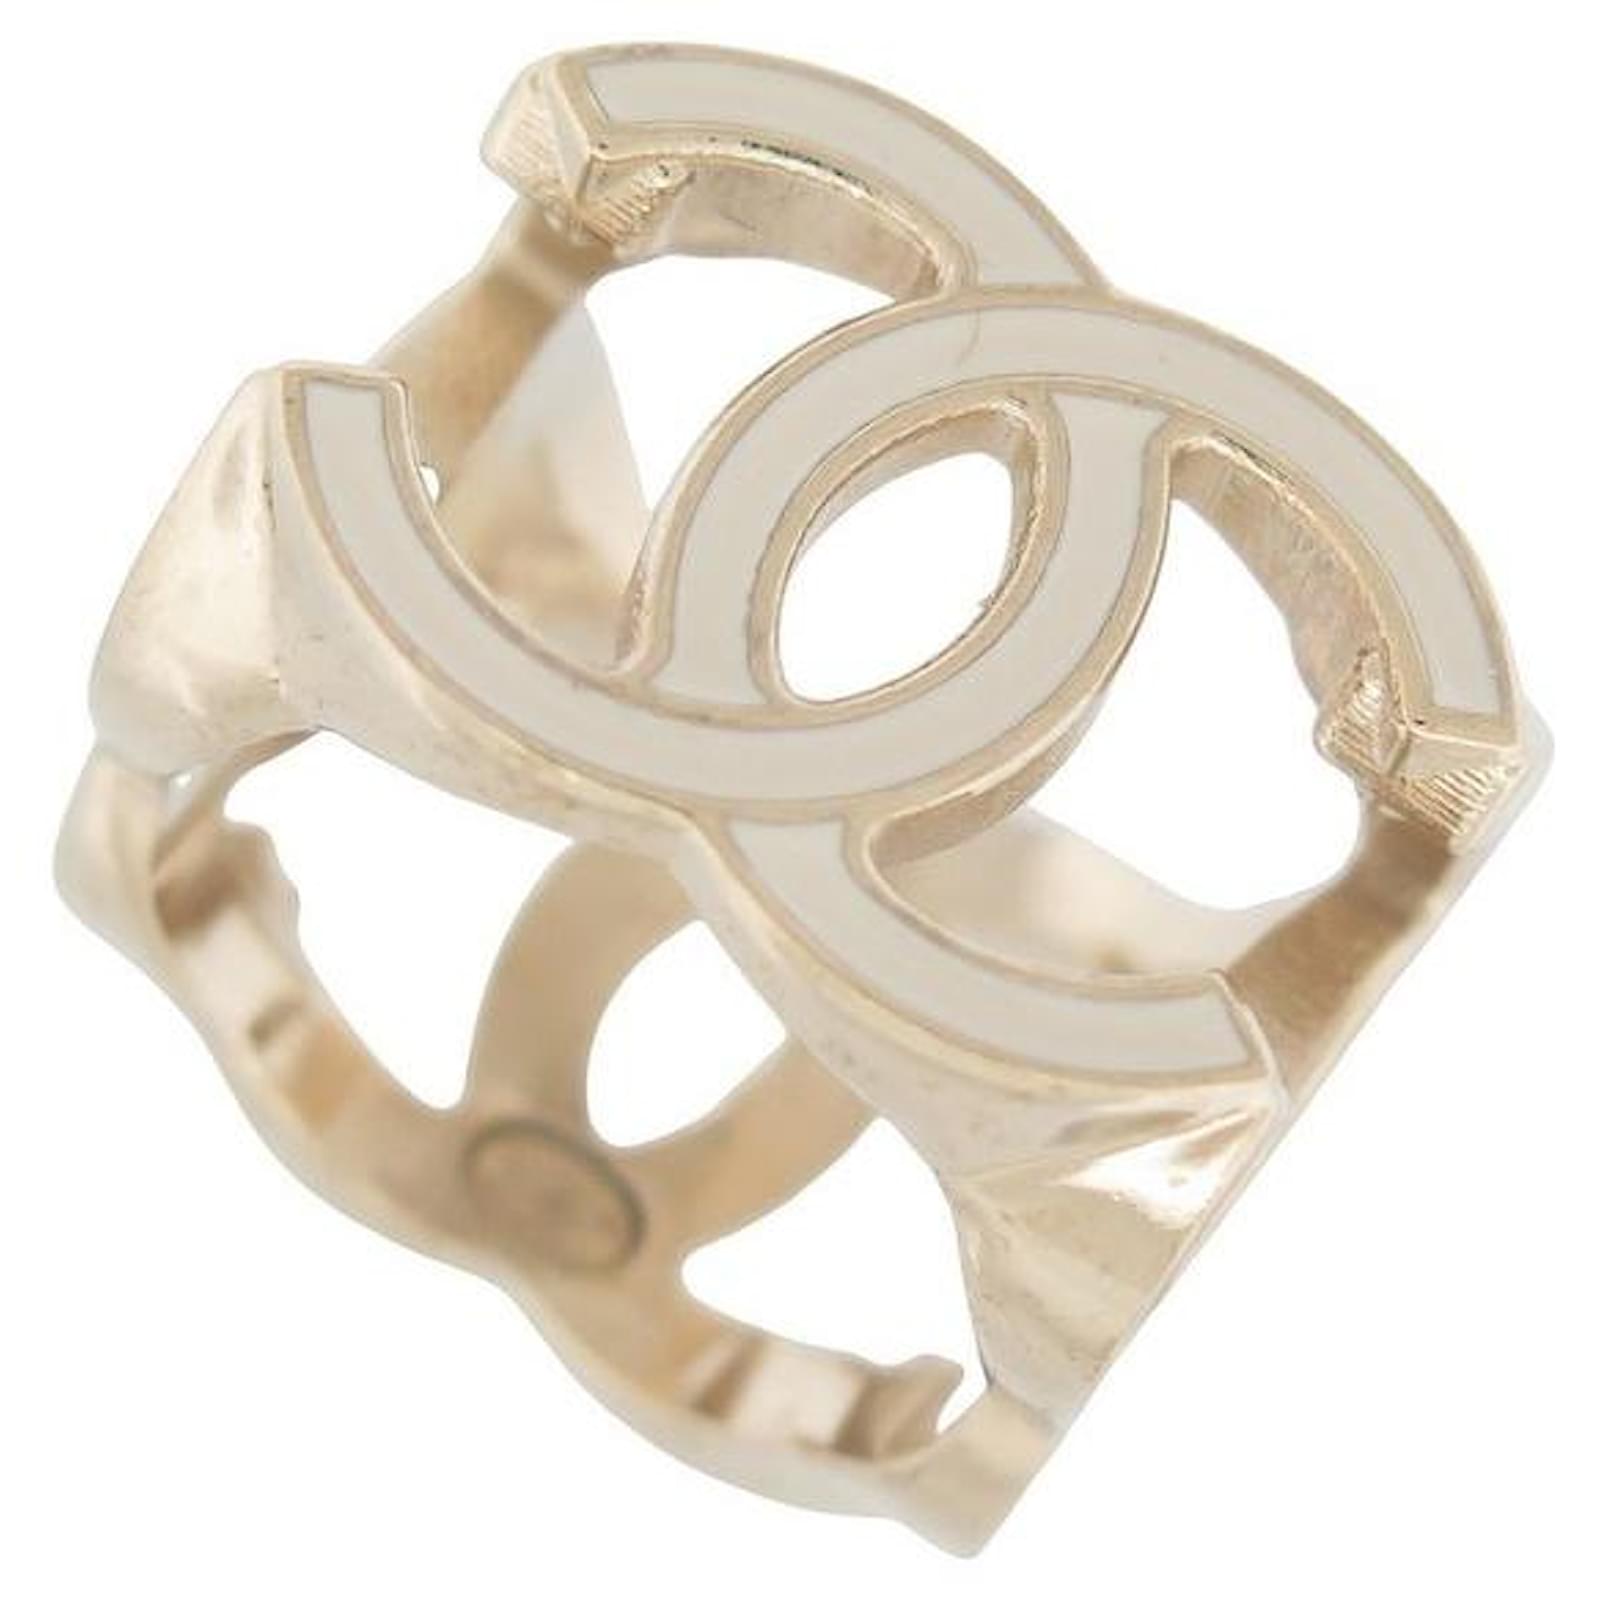 NEW CHANEL CUB LOGO CC RING 54 GOLD METAL AND WHITE LACQUER NEW STEEL RING